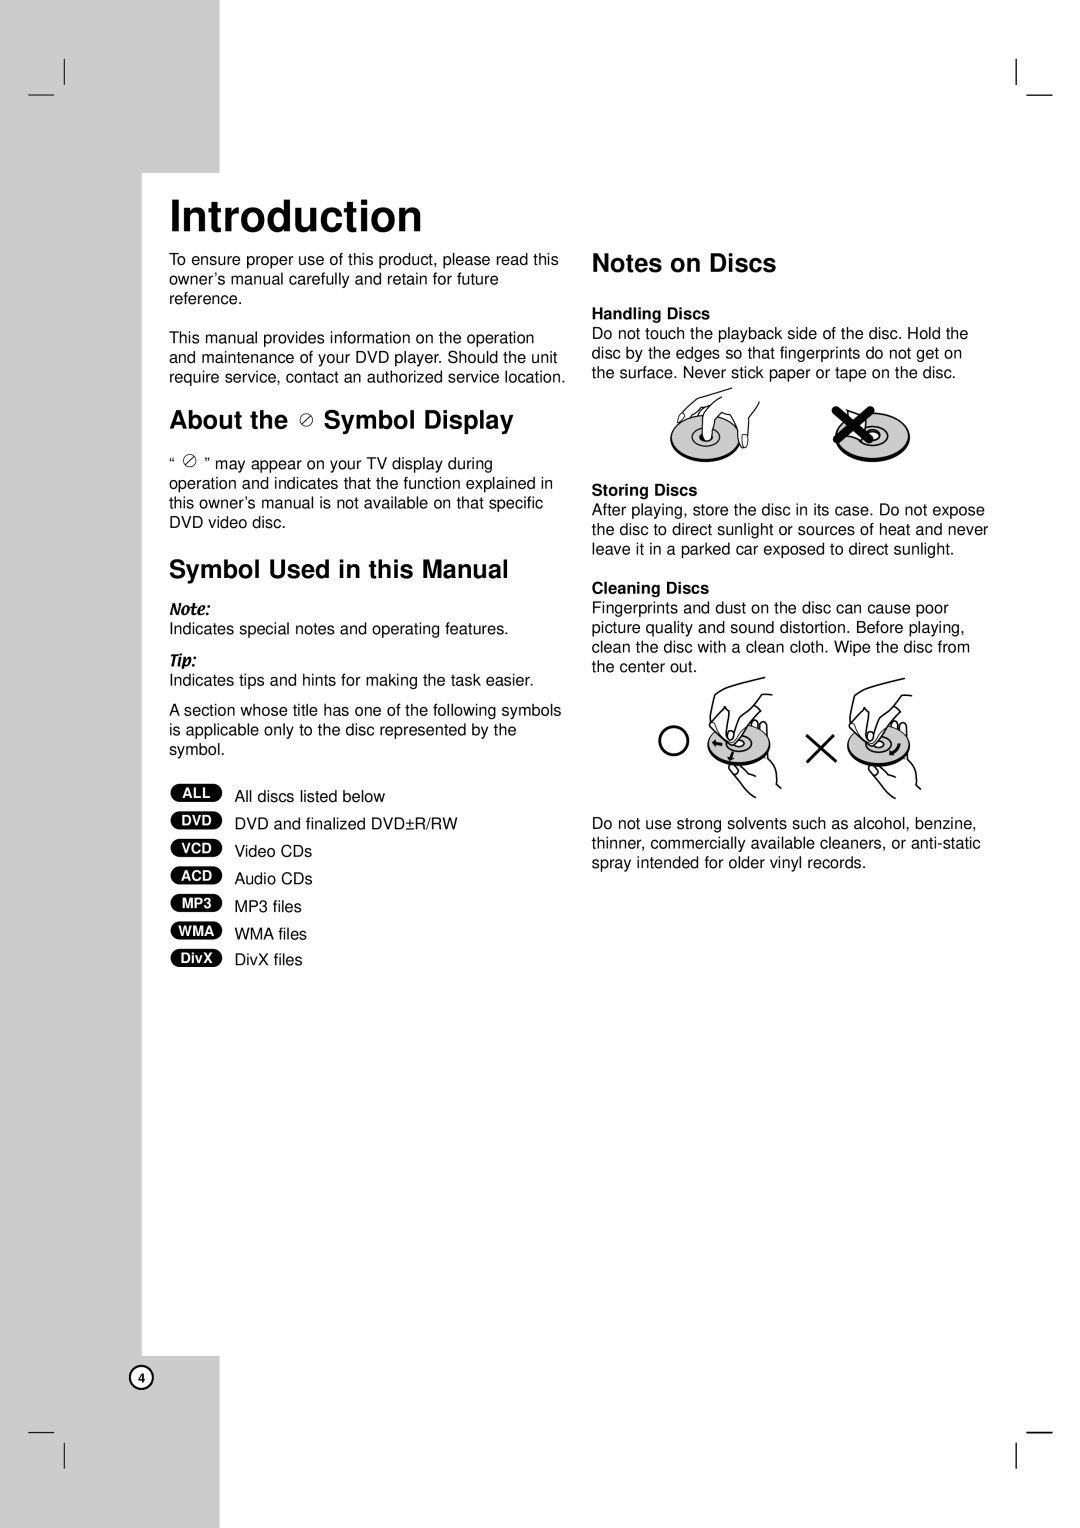 LG Electronics DVX162 Introduction, About the Symbol Display, Symbol Used in this Manual, Notes on Discs, Handling Discs 